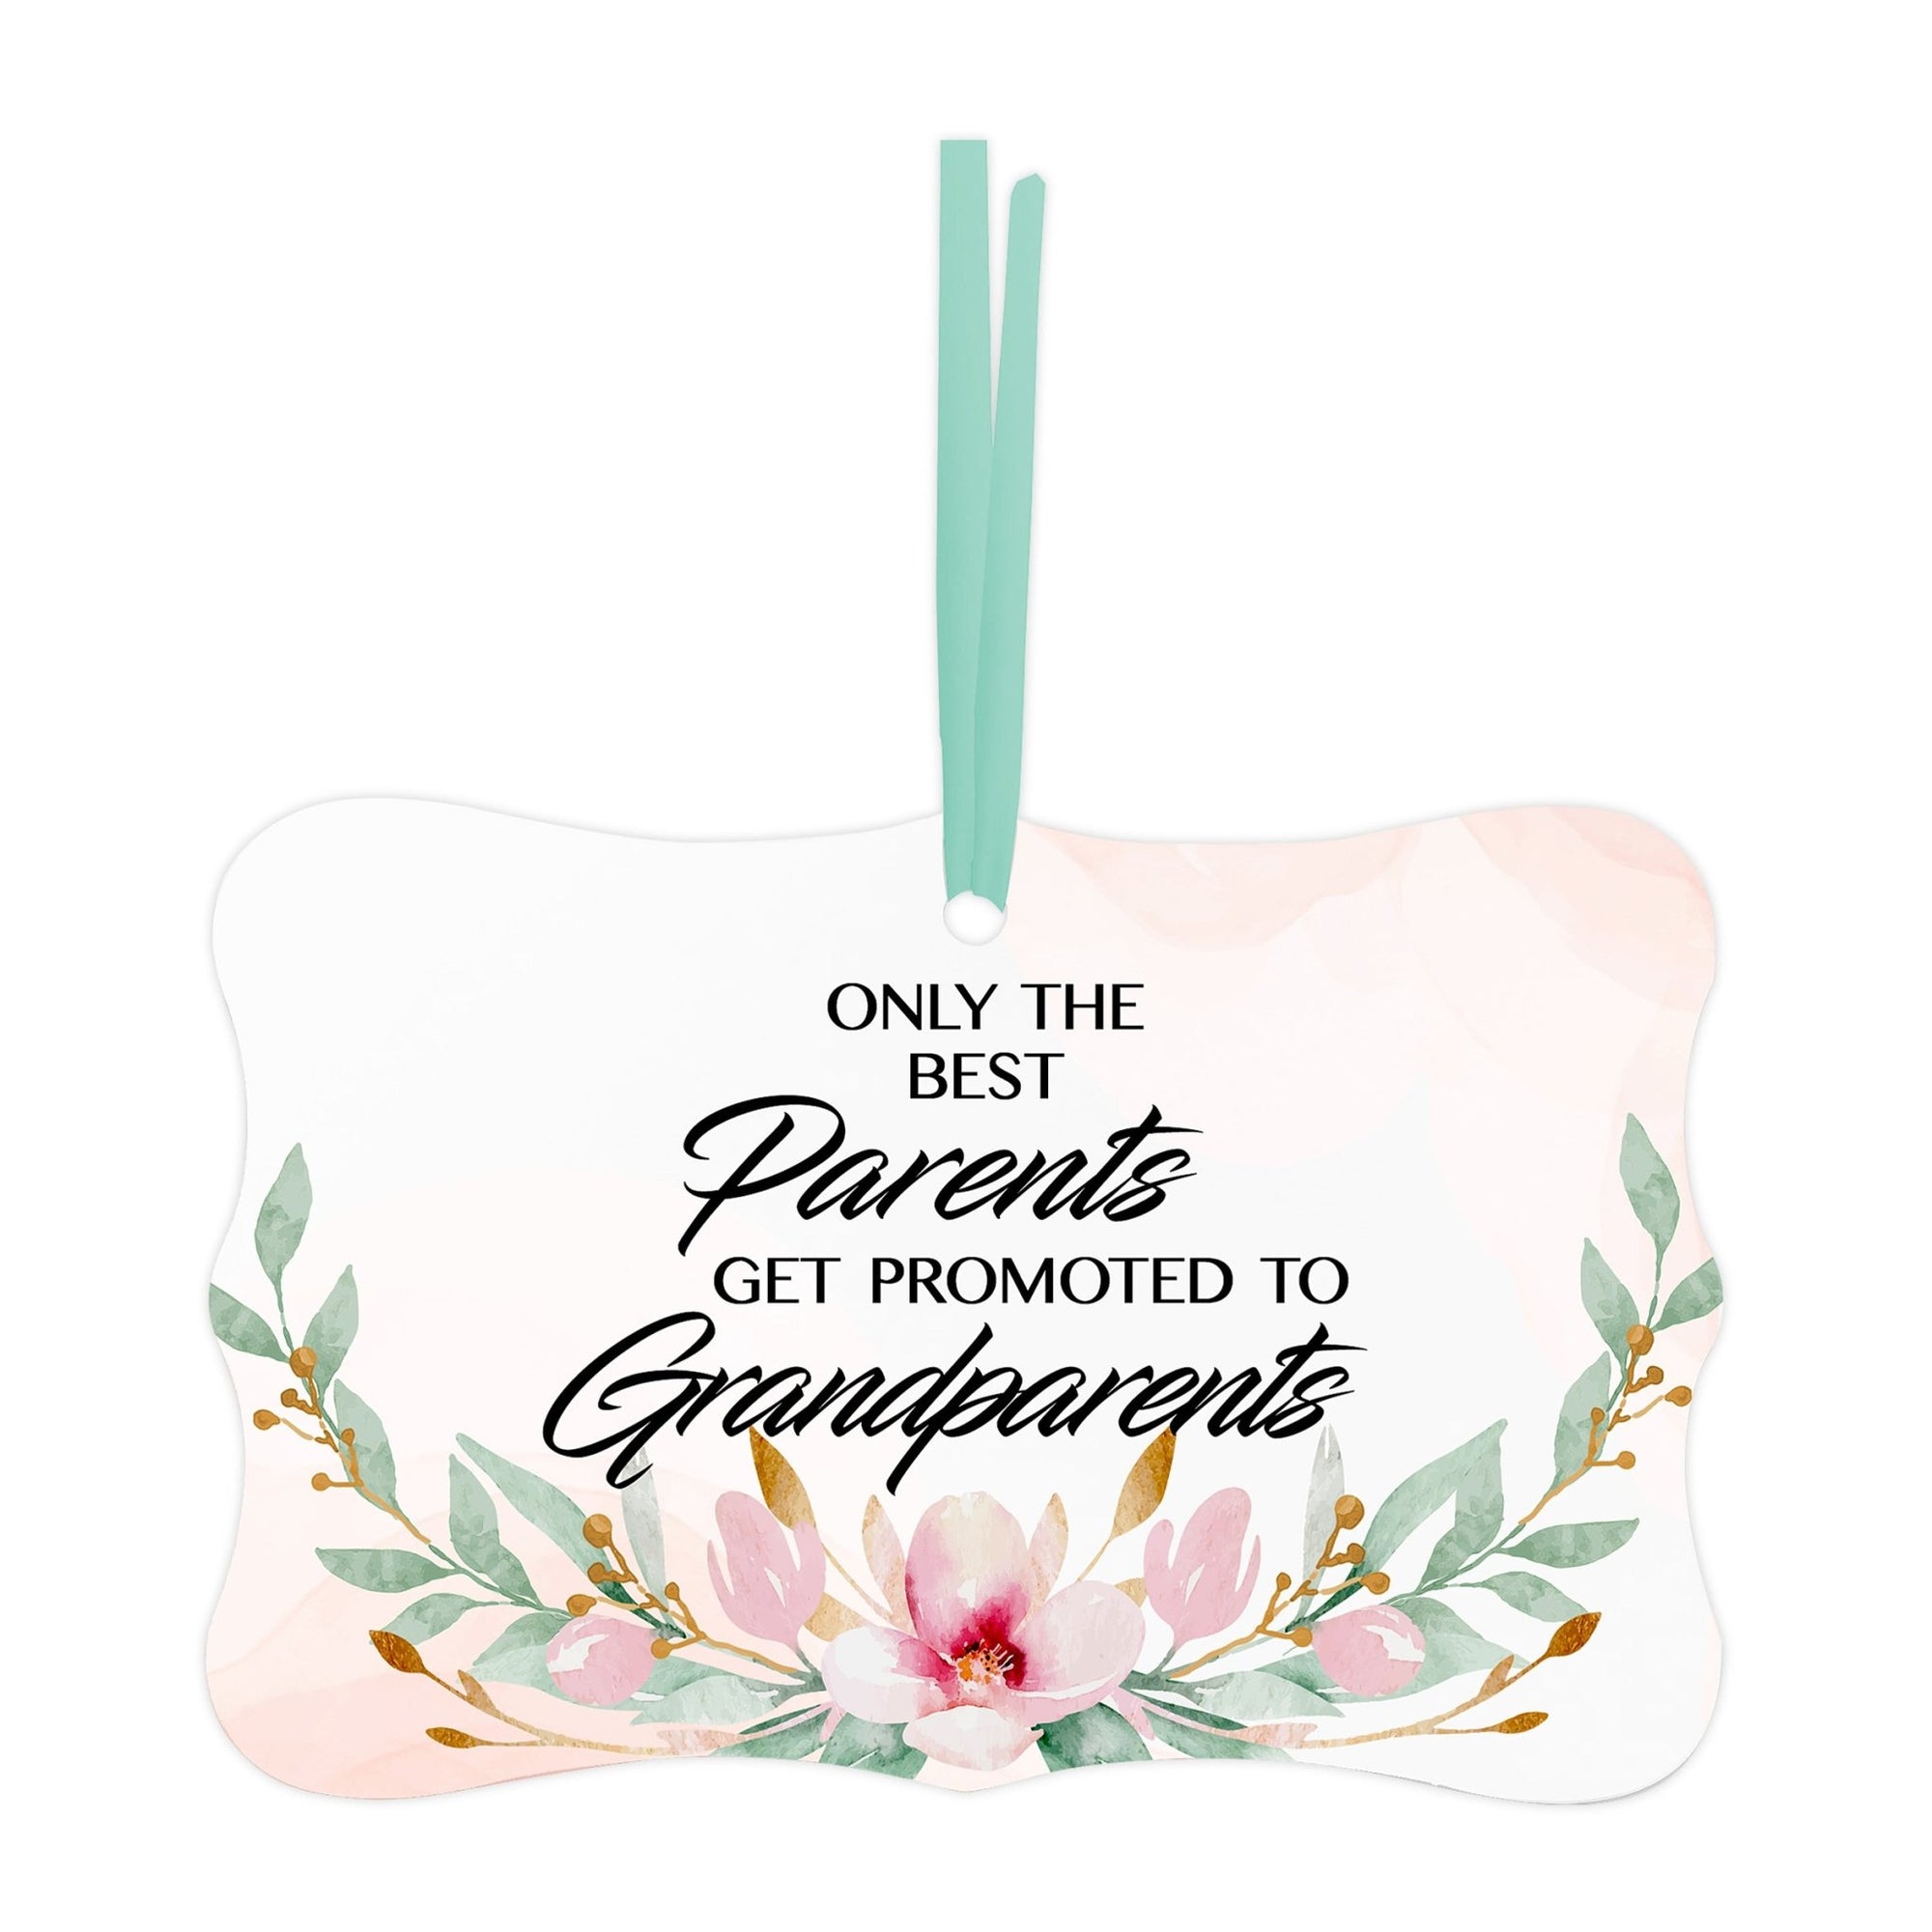 Modern 4x2.5in Christmas White Scalloped Ornament for Grandparents - Only the Best Parents - LifeSong Milestones